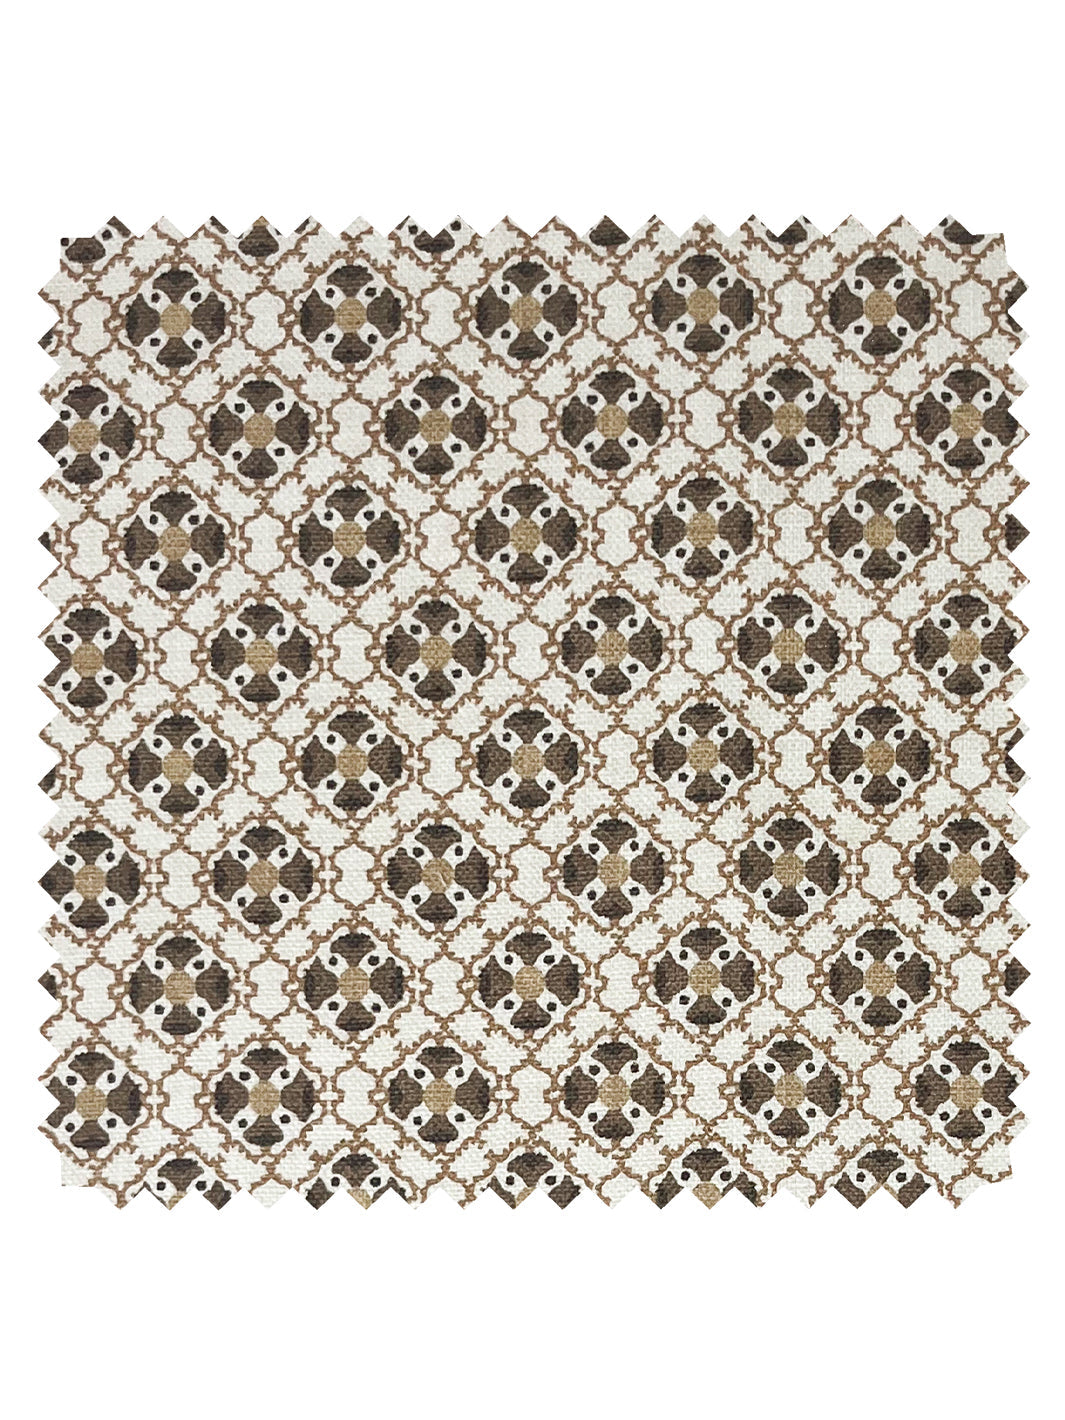 'Medallion All Over' Linen Fabric by Nathan Turner - Brown